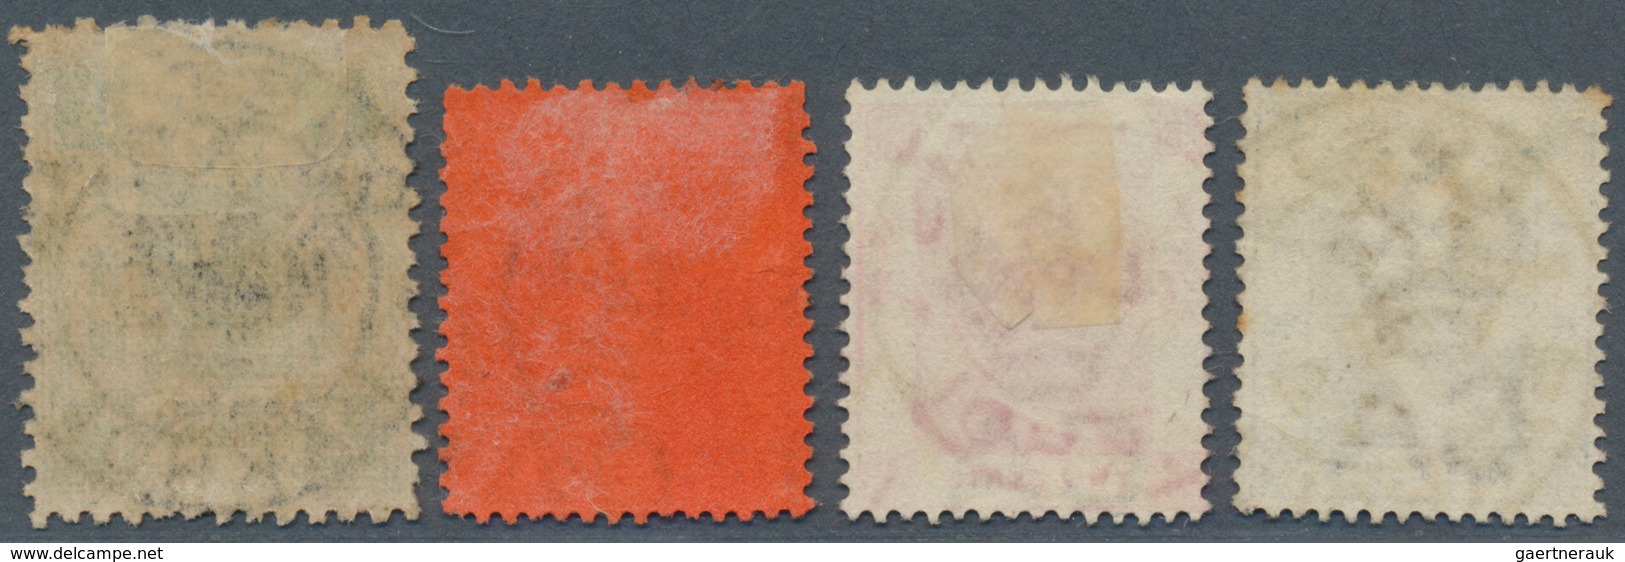 China: 1891/97, "CUSTOMS PAKHOI" Double Circle On Stamps Of Hong Kong Or 2 Cents/2 Ca., All Readable - 1912-1949 Republik